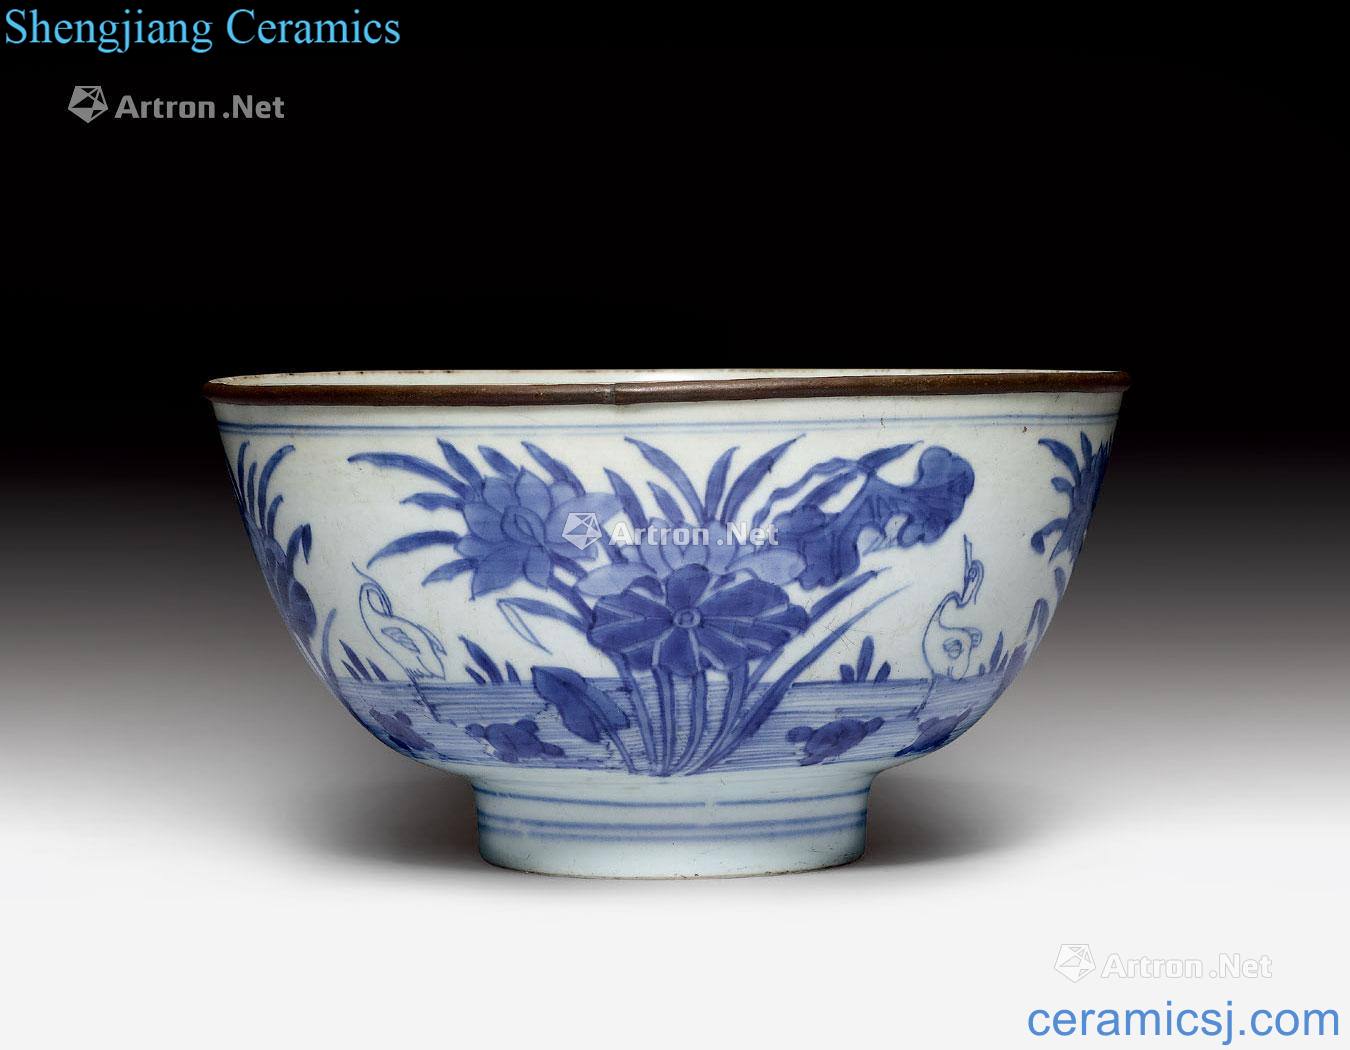 About 1650 years Blue and white lotus edge bowl